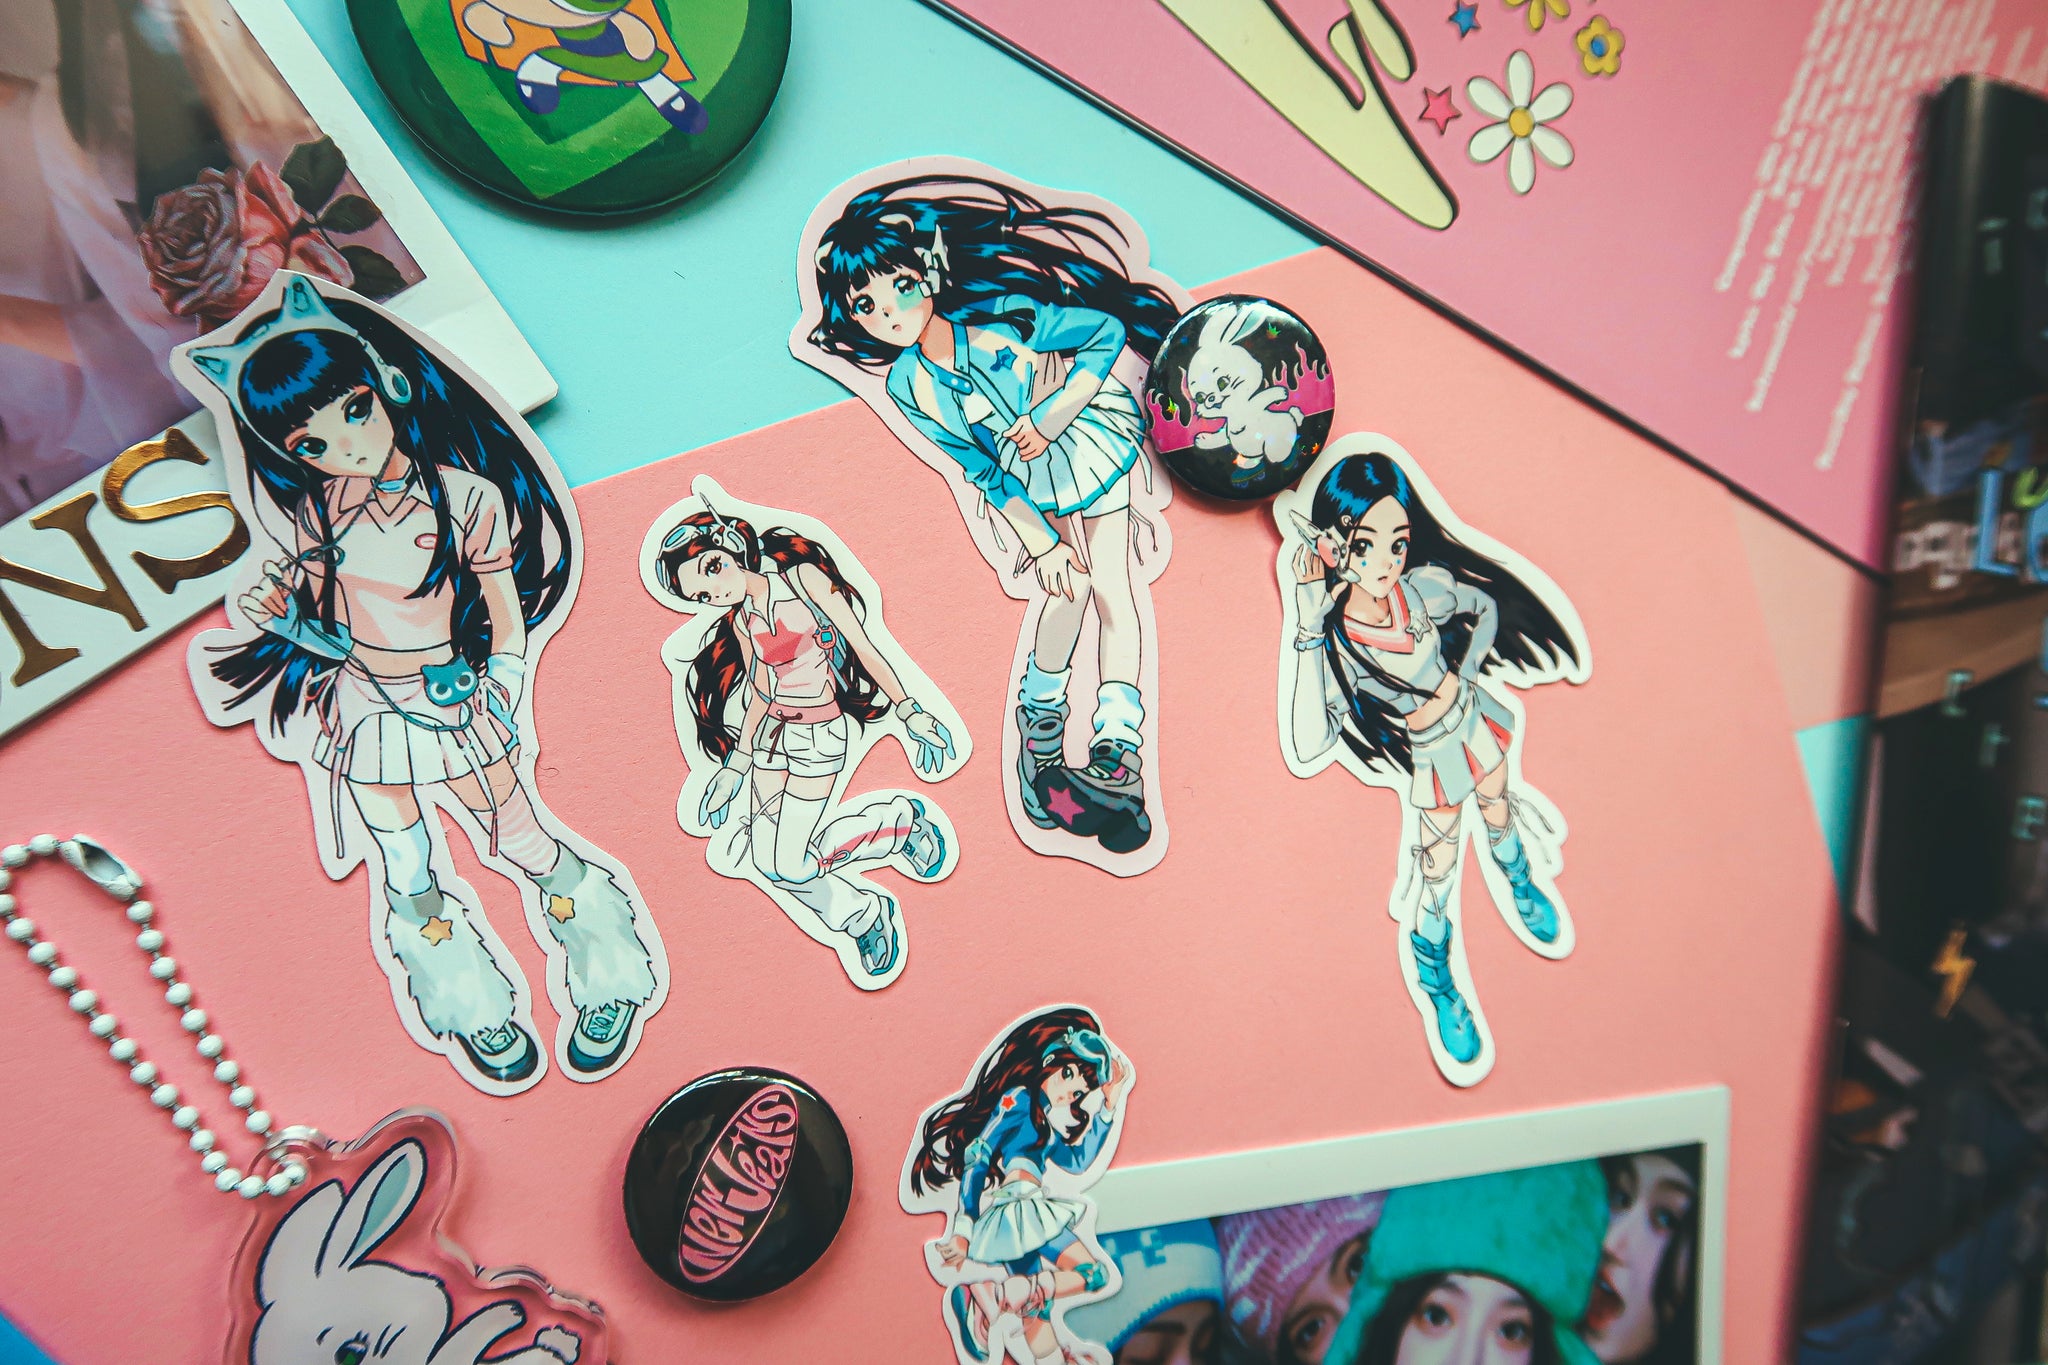 NewJeans K-pop idol group Get Up/ASAP/Super Shy Manga Anime Magical Girl Persona Glossy Stickers (5 Designs, 3 Sizes)